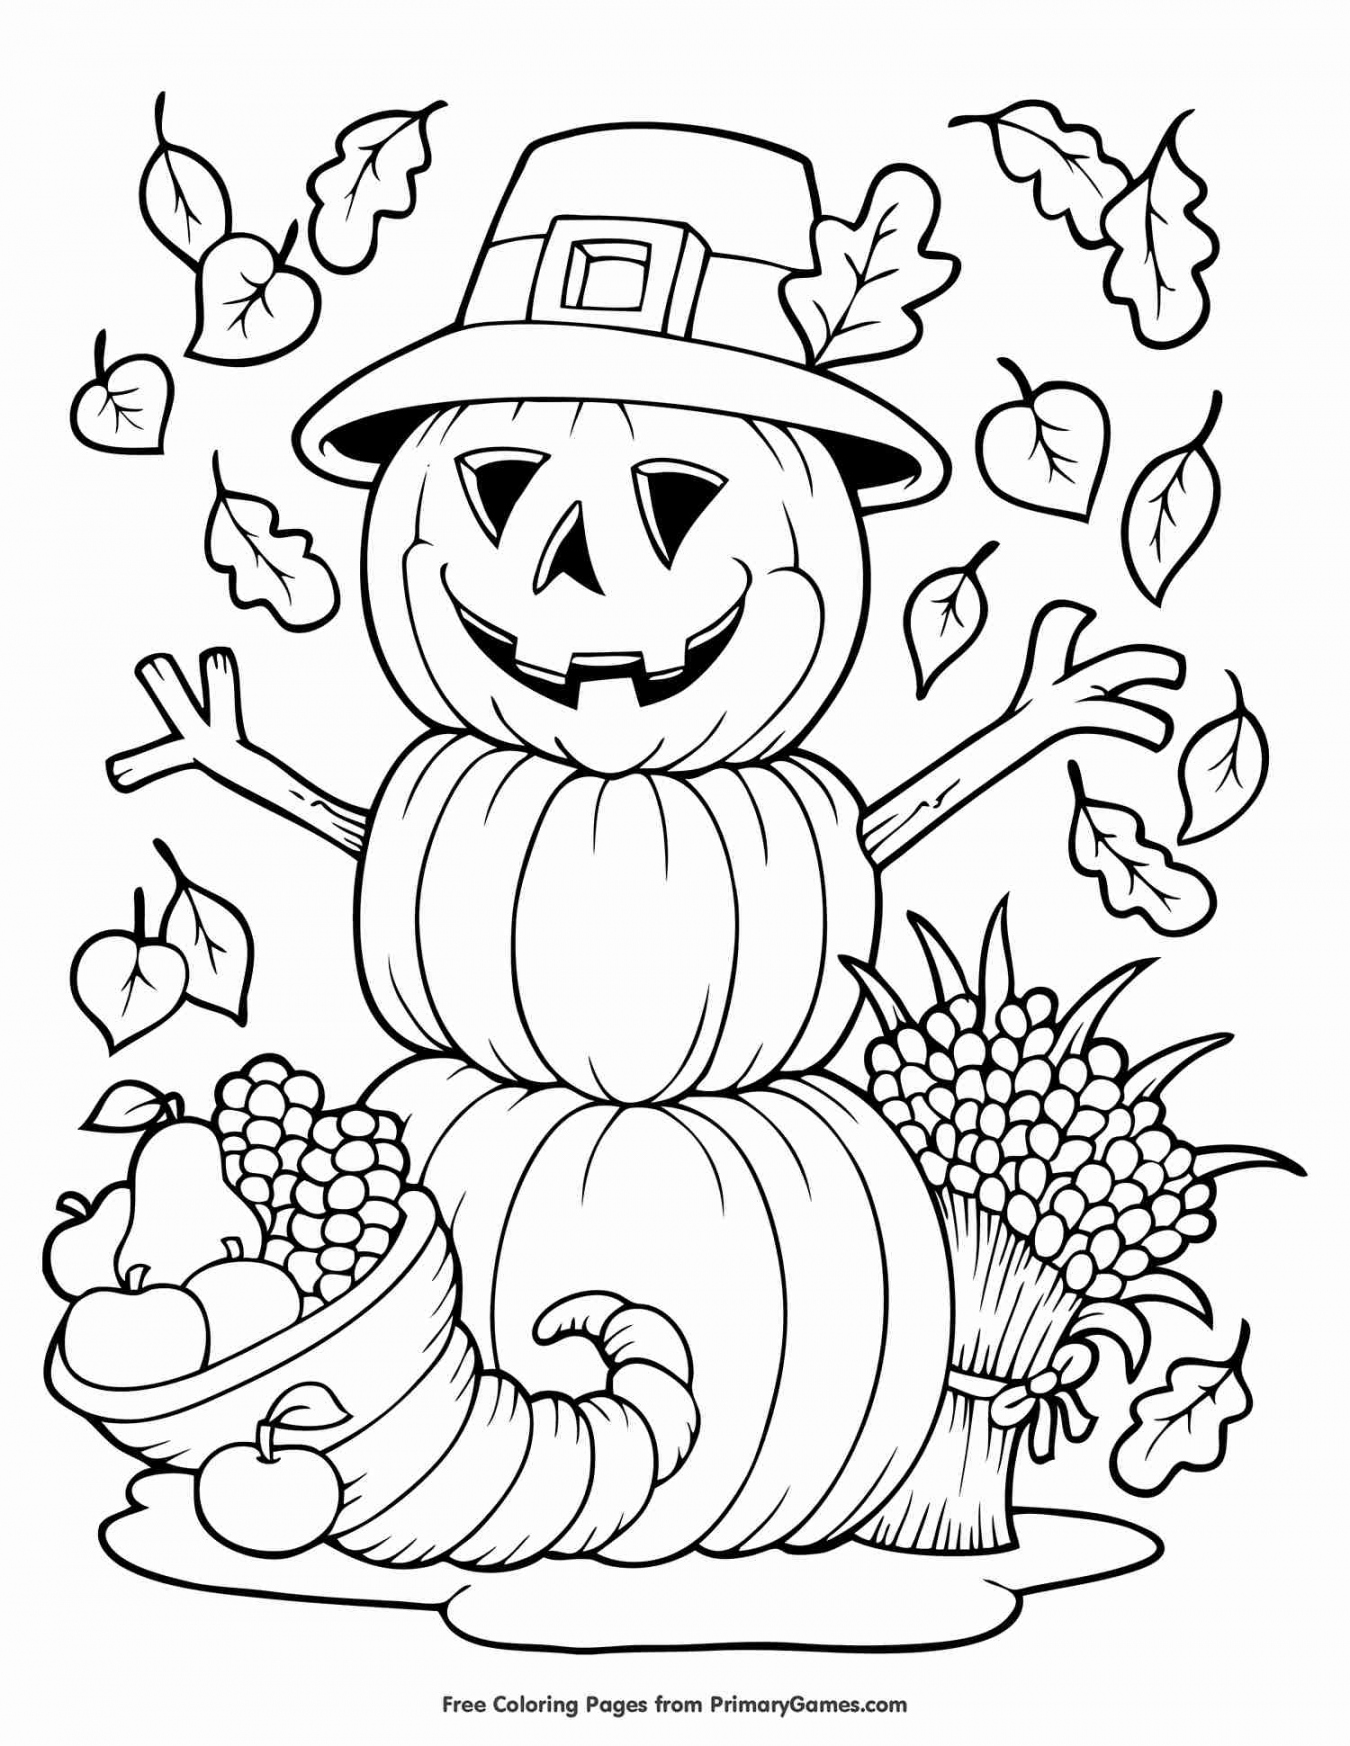 Free Printable Coloring Pages Fall - Printable -  Places to Find Free Autumn and Fall Coloring Pages